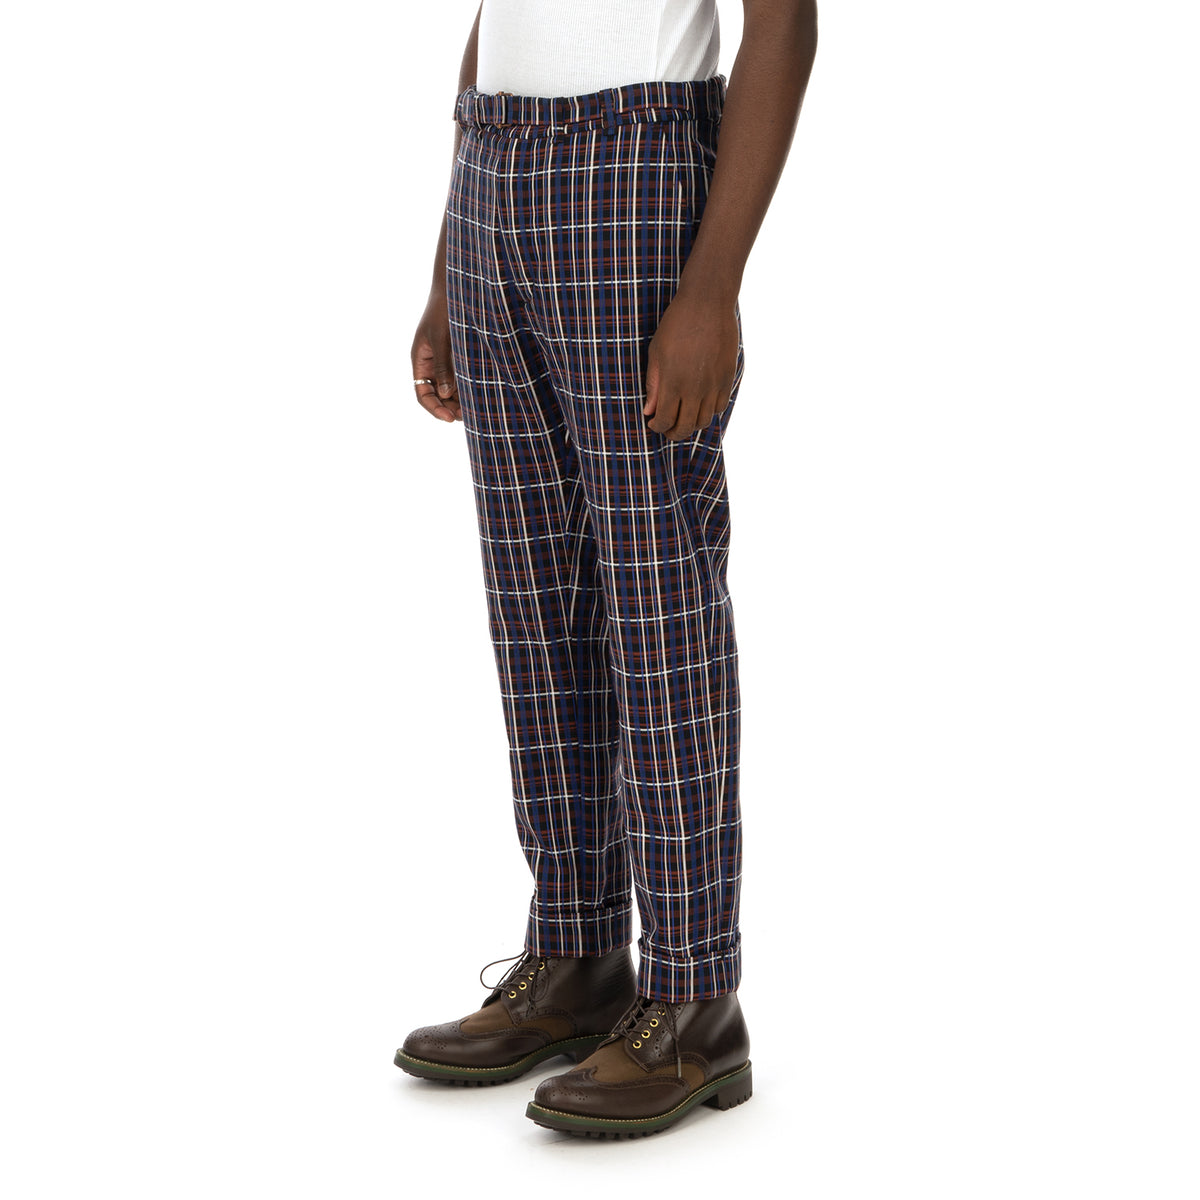 YOOST | Mr. Bootcamp Trousers Blue Check - Concrete